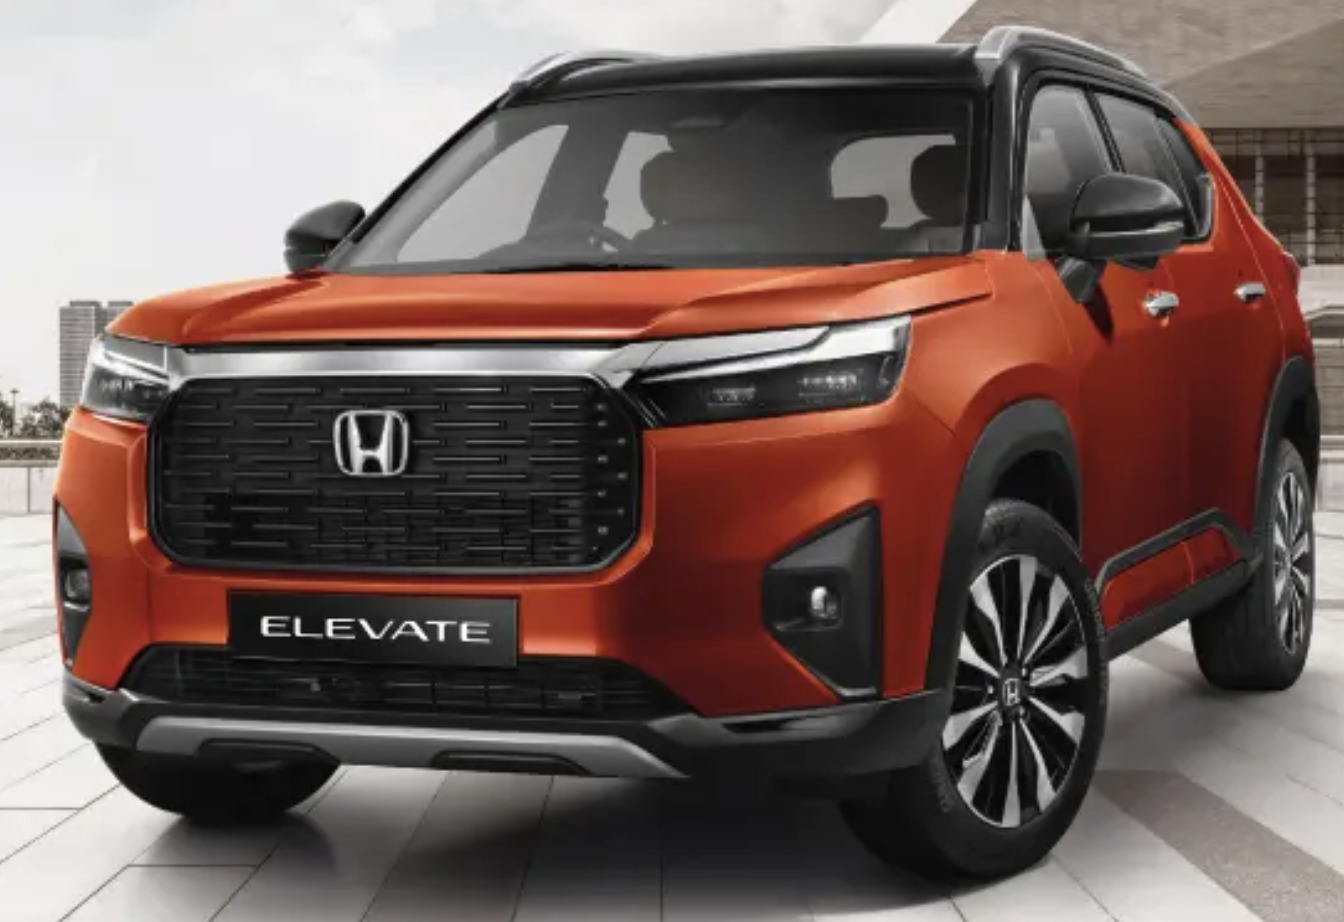 Honda Elevate Features and Variants List Leaked Ahead of Launch in India - photograph